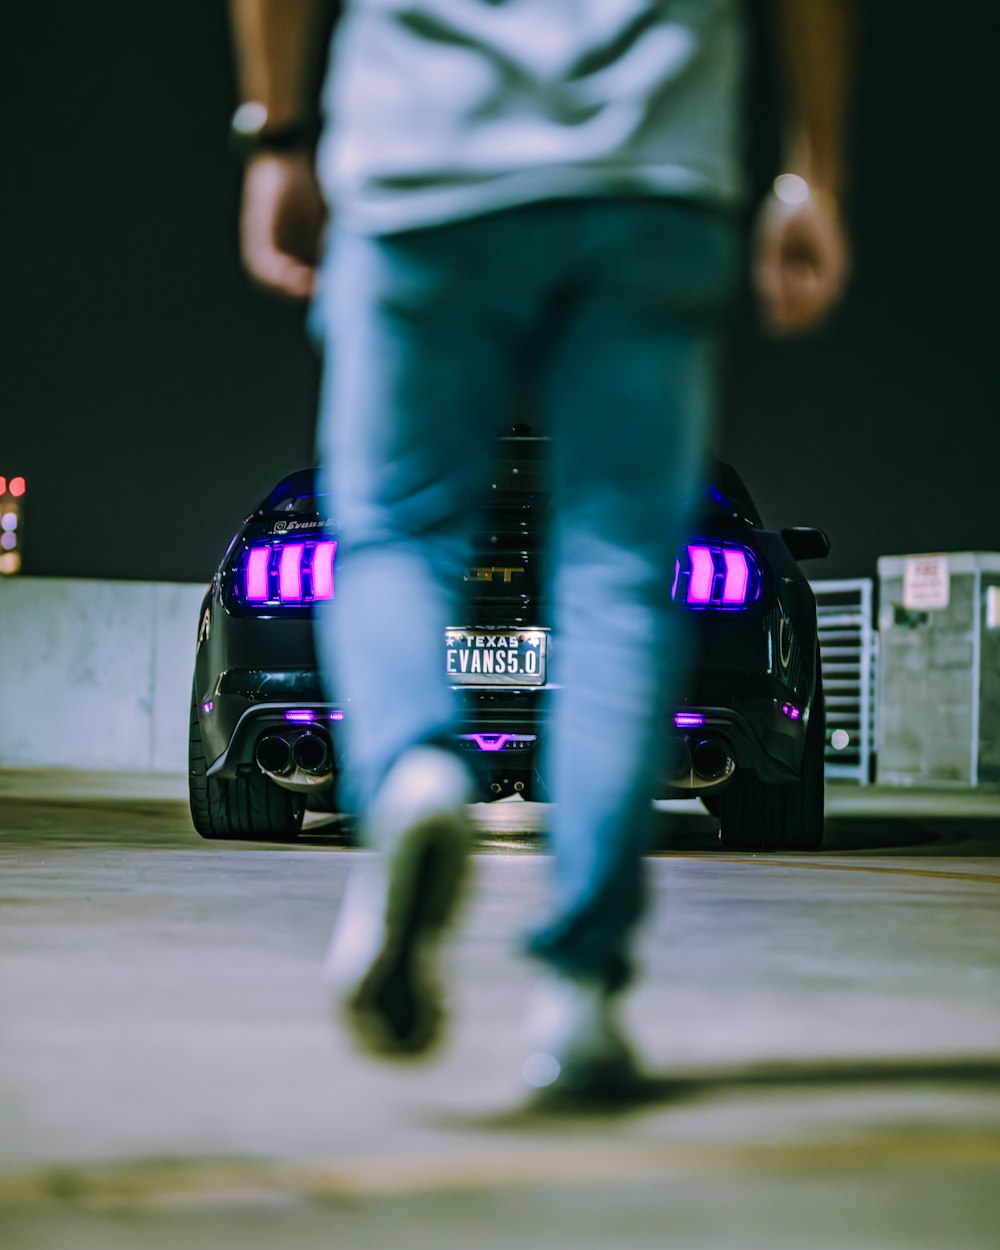 a man walking past a car with a purple tail light